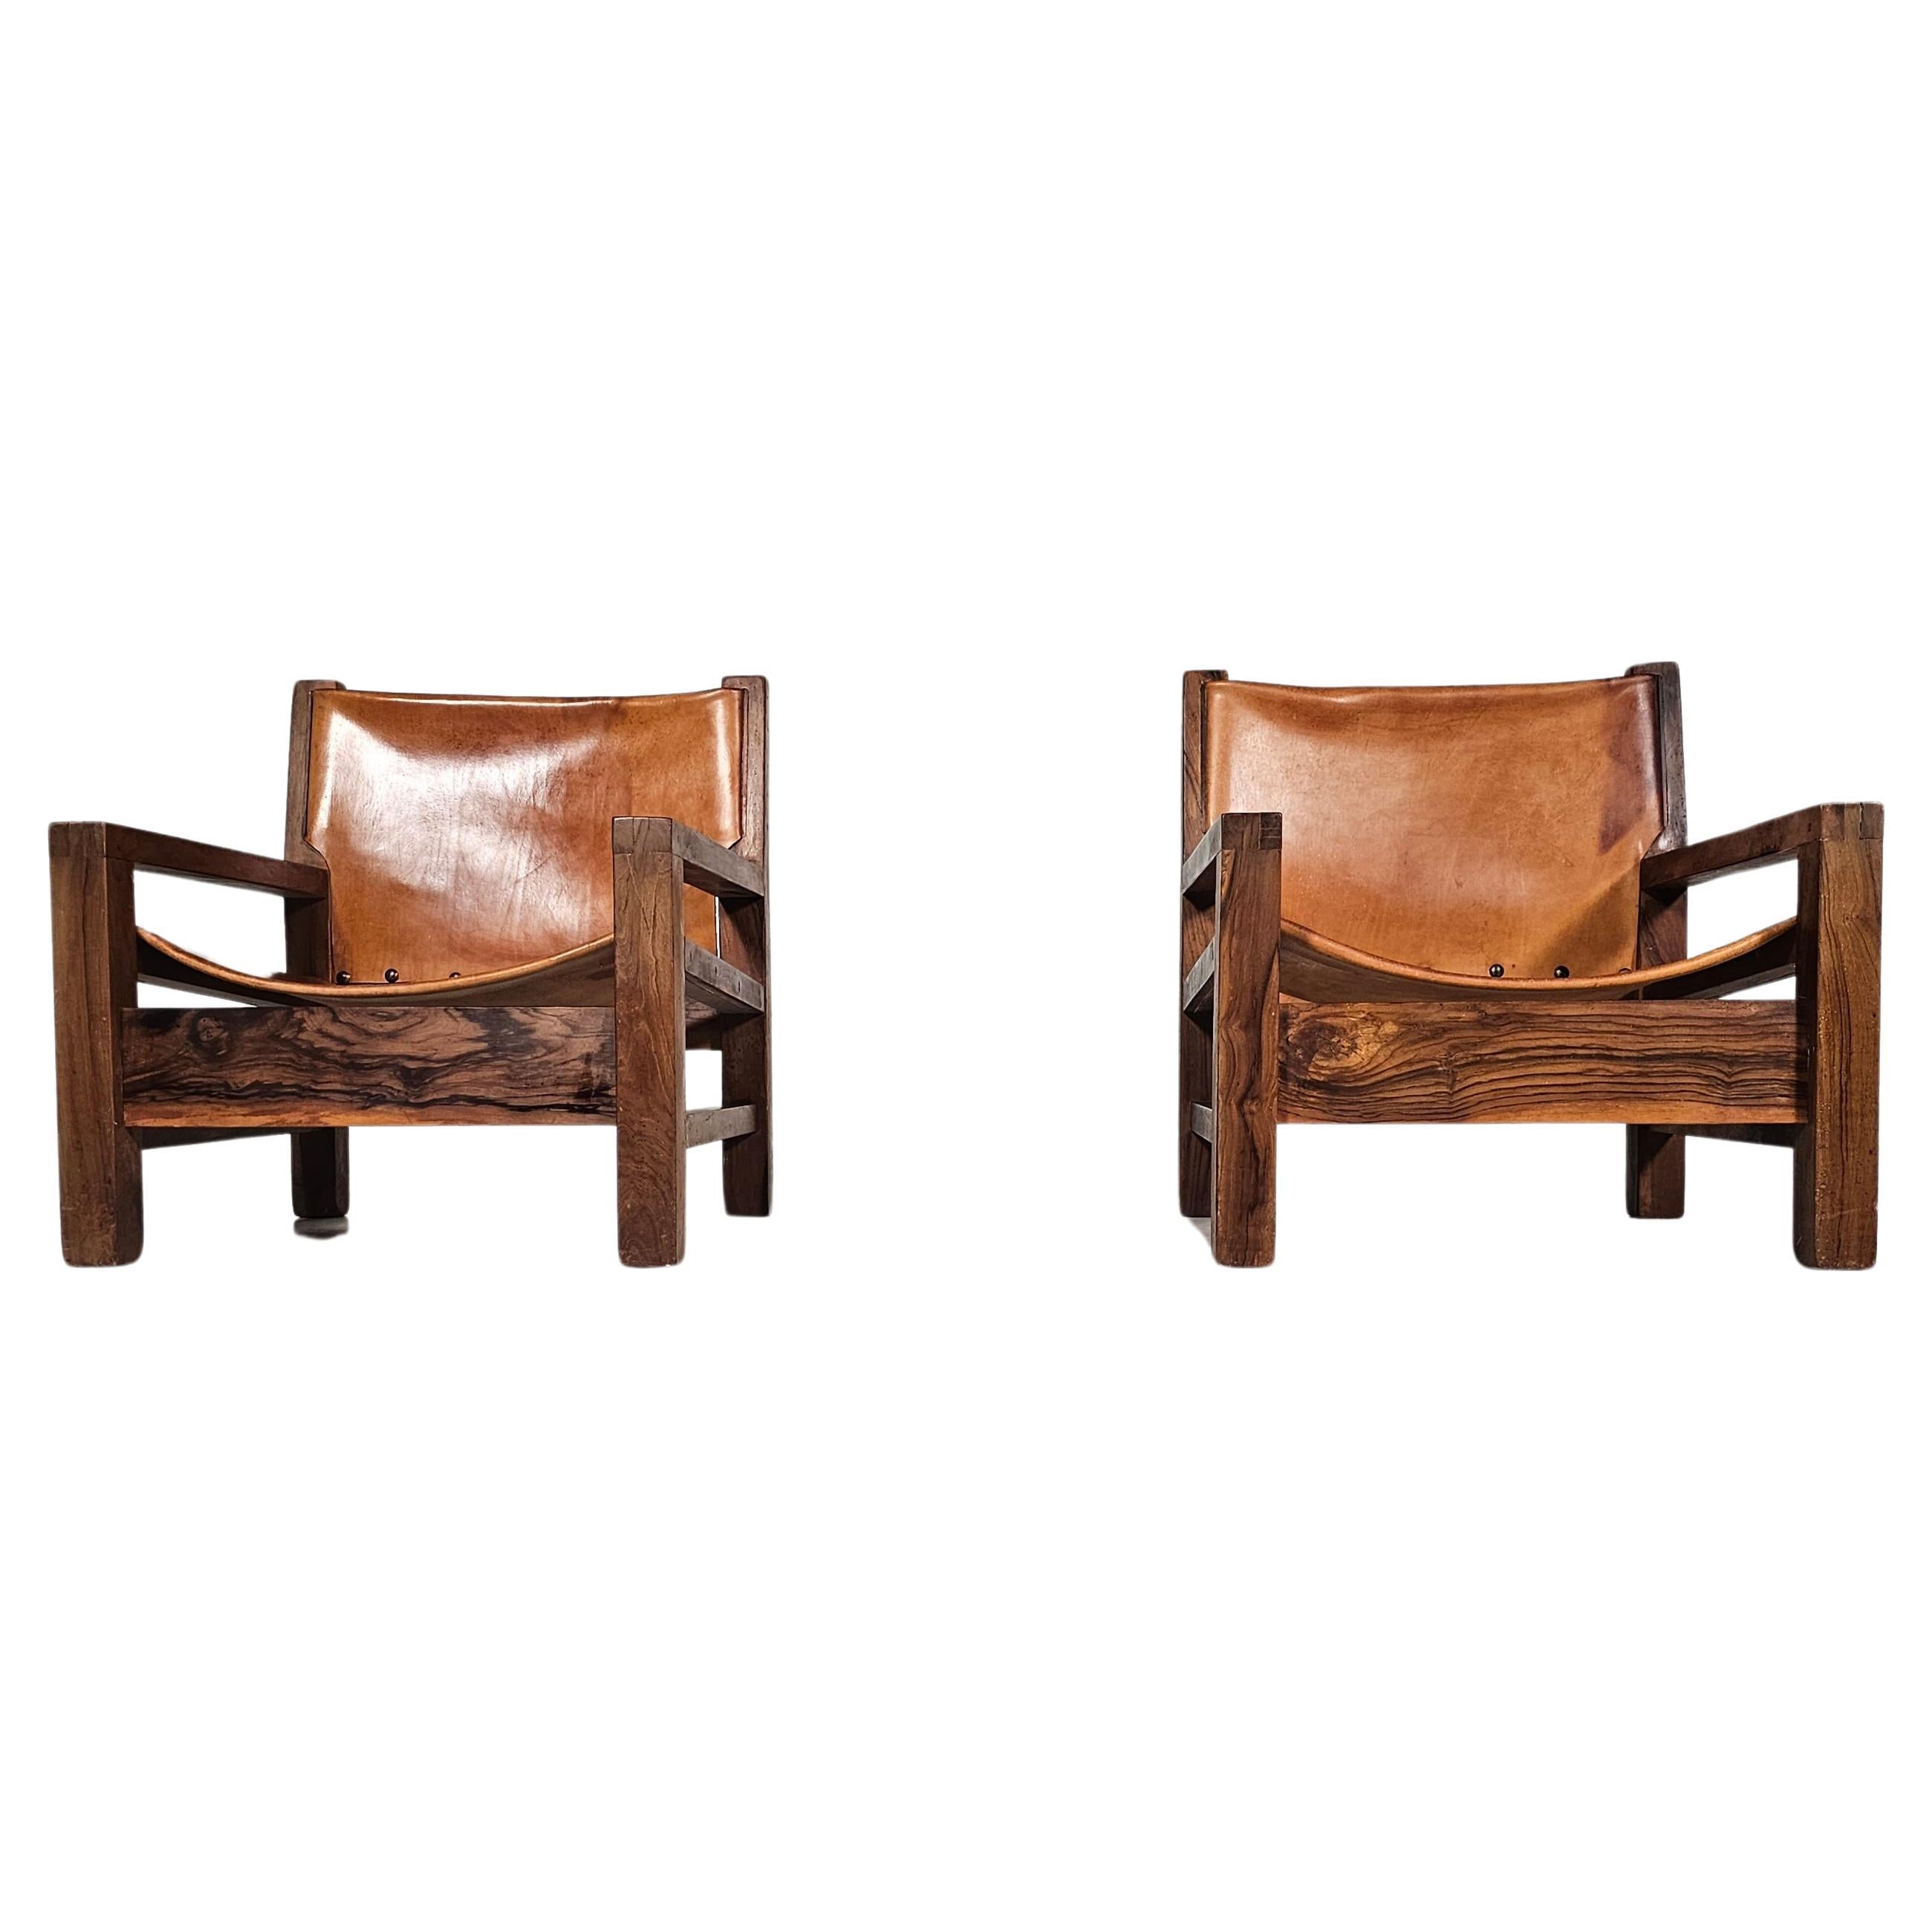 A pair of armchairs hails from the skilled hands of a seasoned cabinet maker in 1970s France. Crafted with meticulous attention to detail, these armchairs boast a structure fashioned from exquisite olive wood, ensuring not only sturdiness but also a